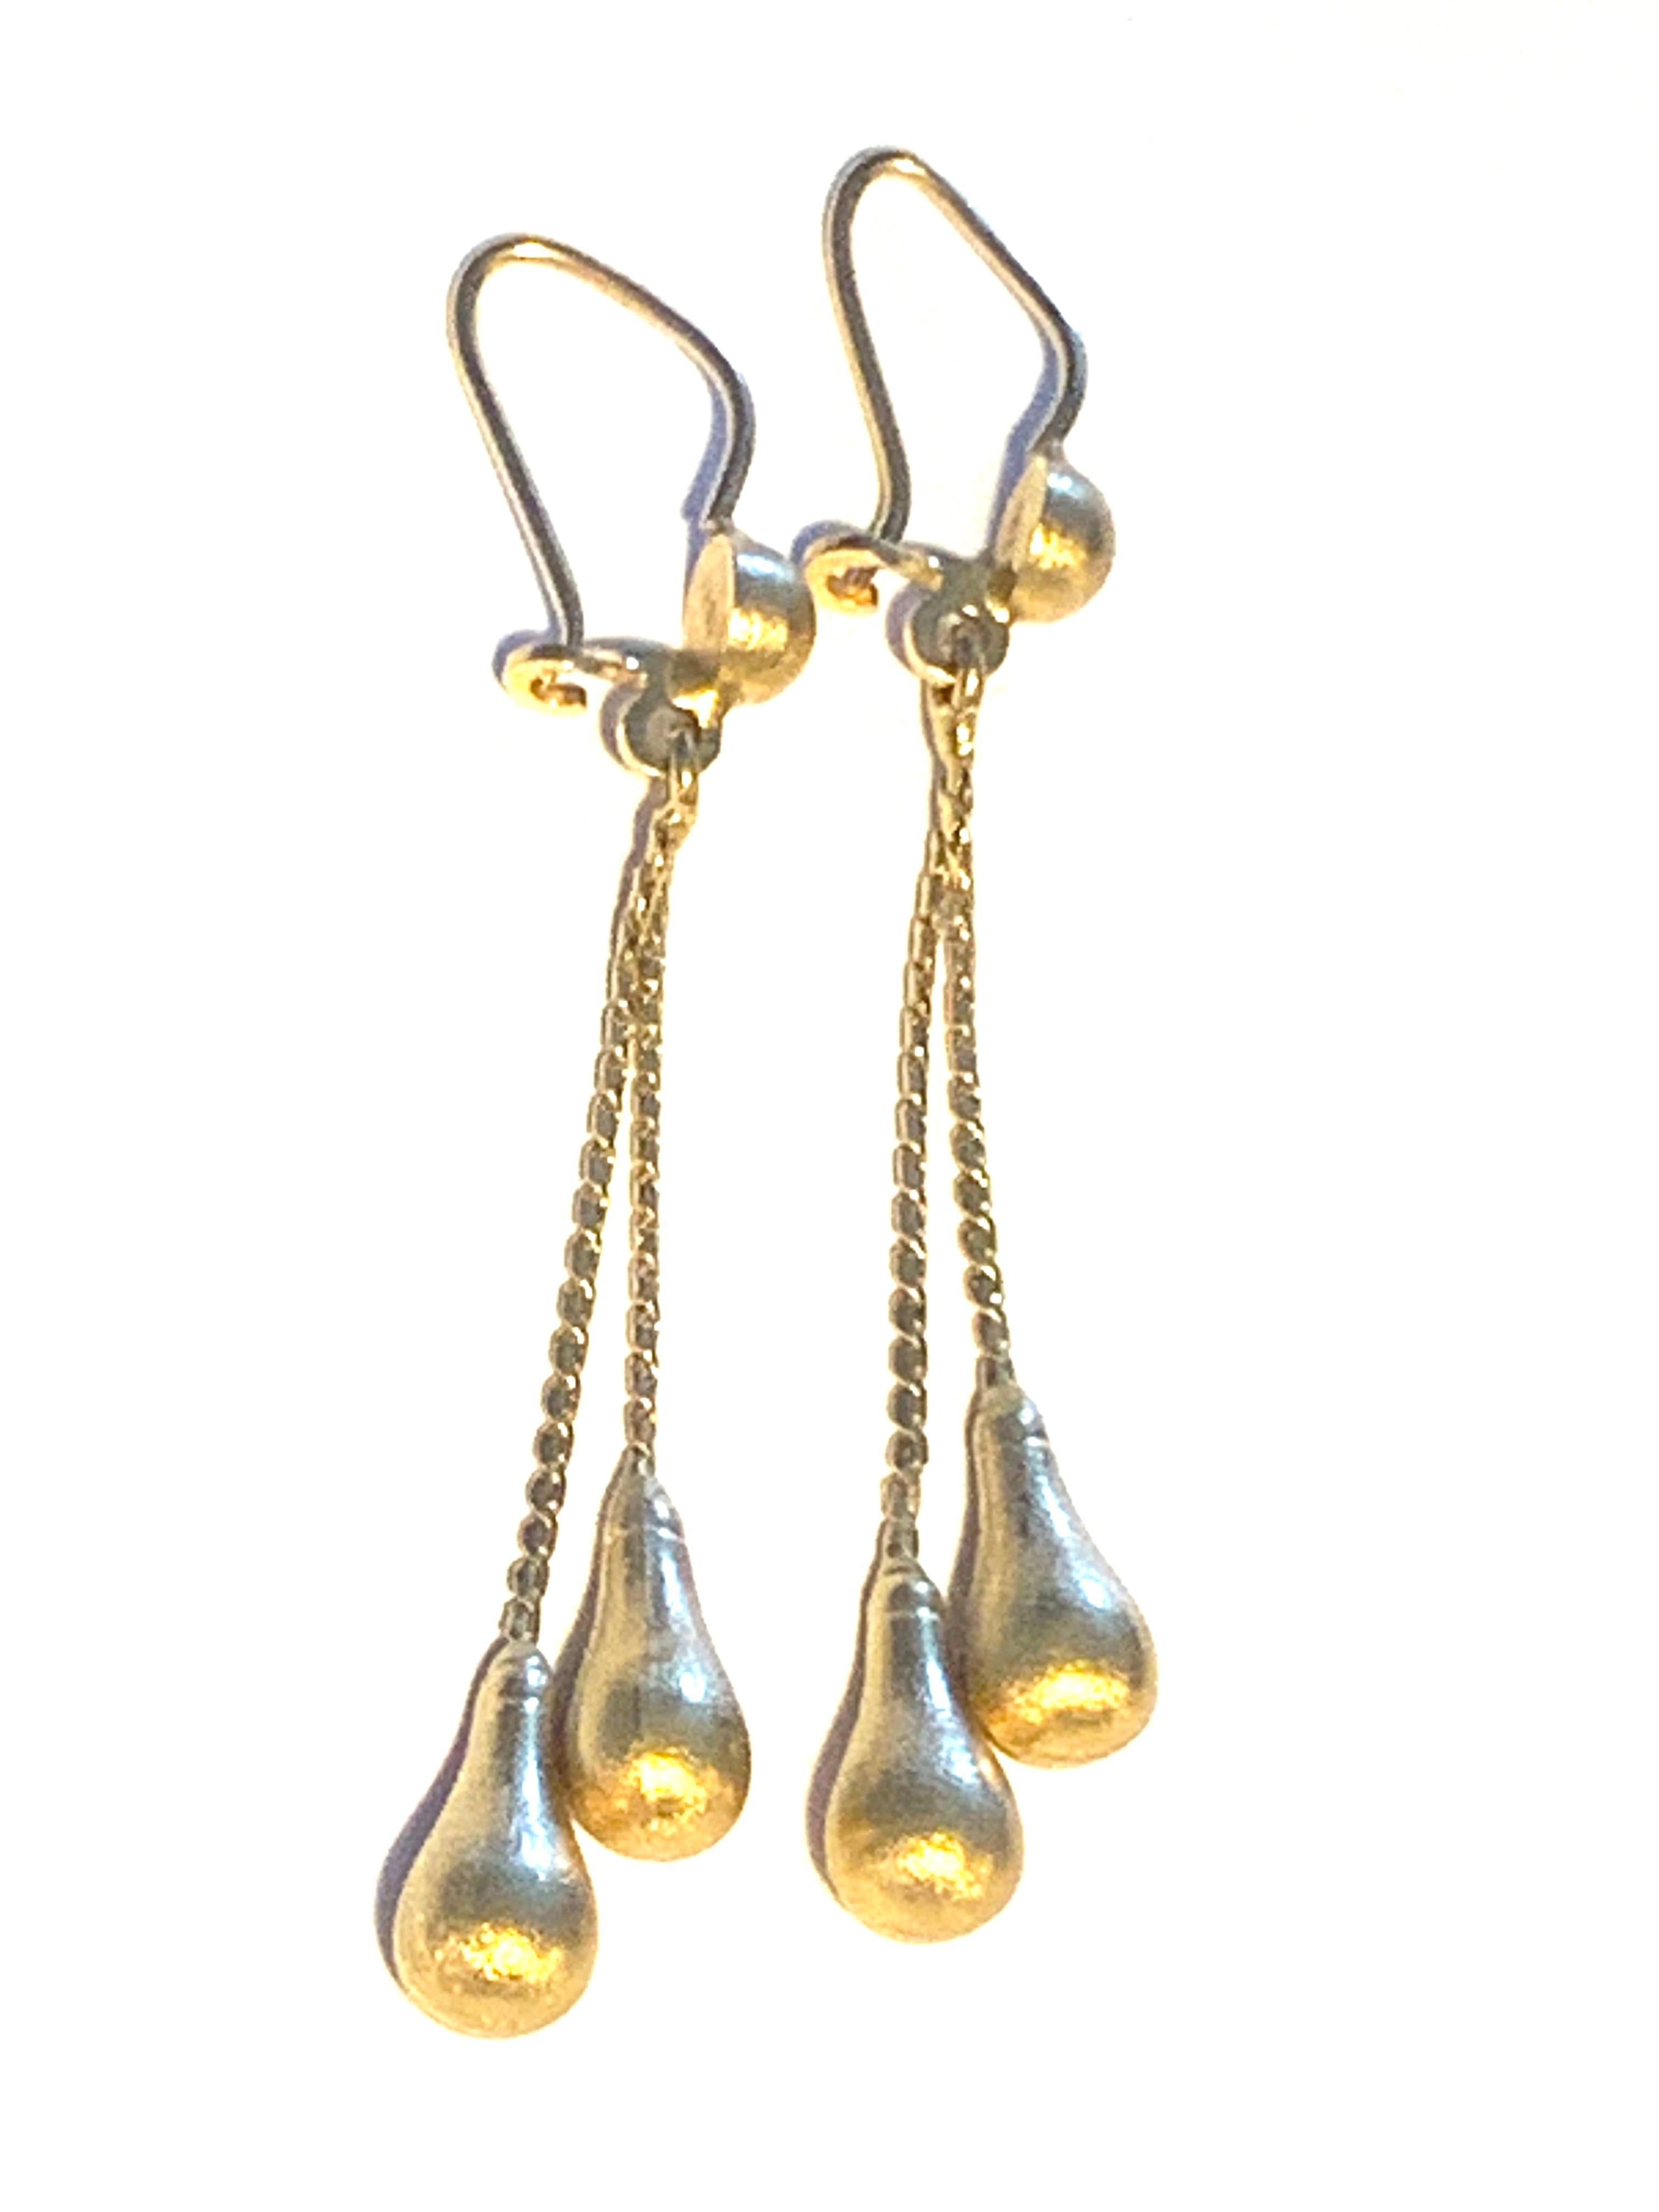 Beautiful Rare Vintage Circa 1970s
18ct 750 Gold Earrings
Dangle droplet Earrings
Stamped 18k
Droplets have a sandblast surface finish
and are solid - not hollow
that gives the earrings a weighty swing movement when worn

Actual length of chain &